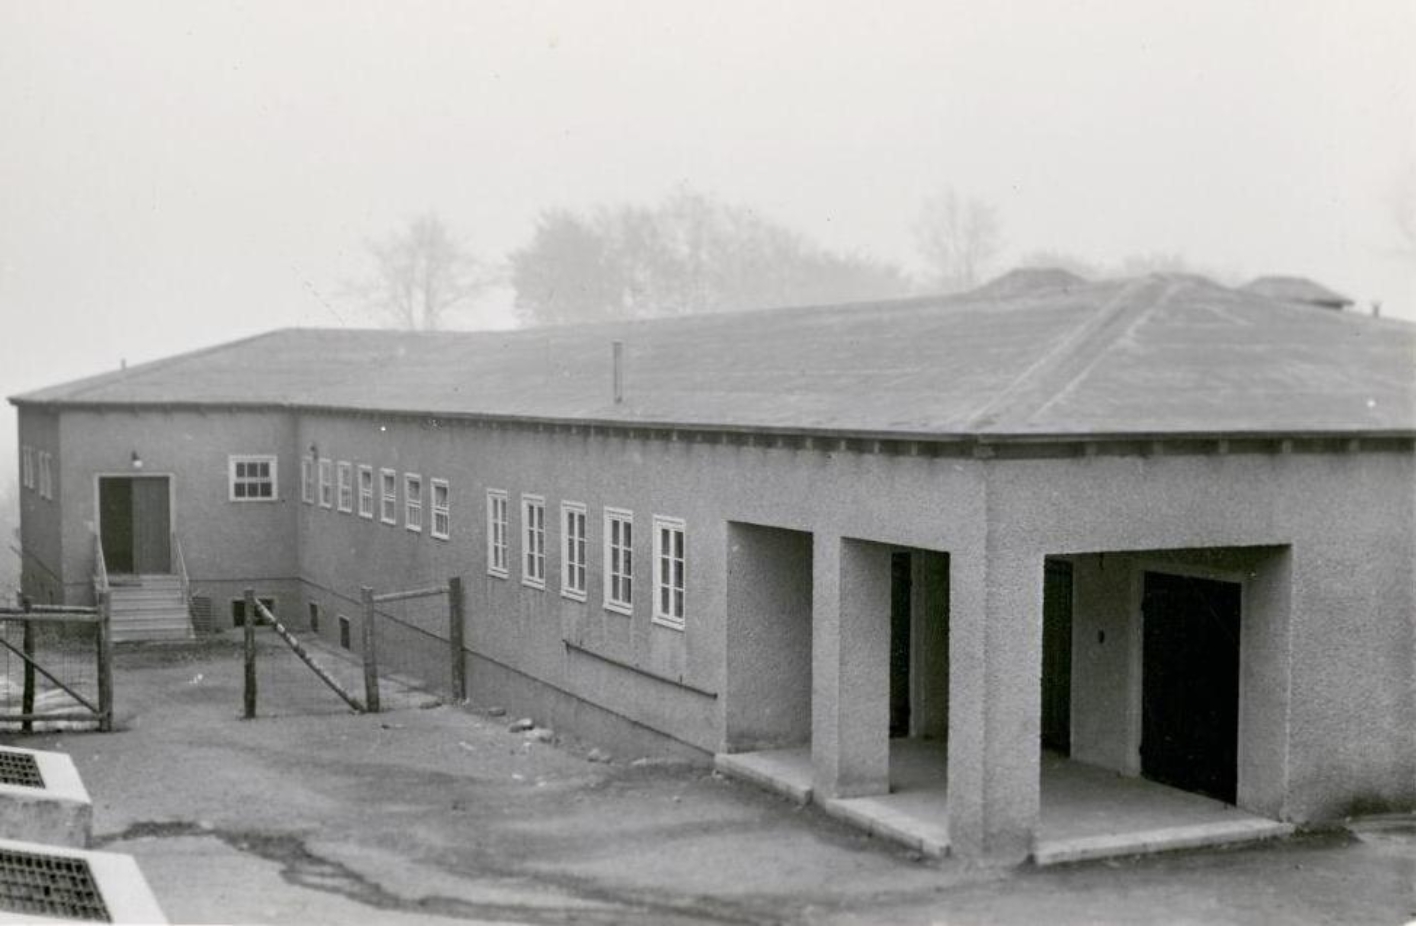 The disinfection building from the outside. A simple, flat building. Two entrances can be seen. A smaller one on the left behind a fence, one on the right in front.